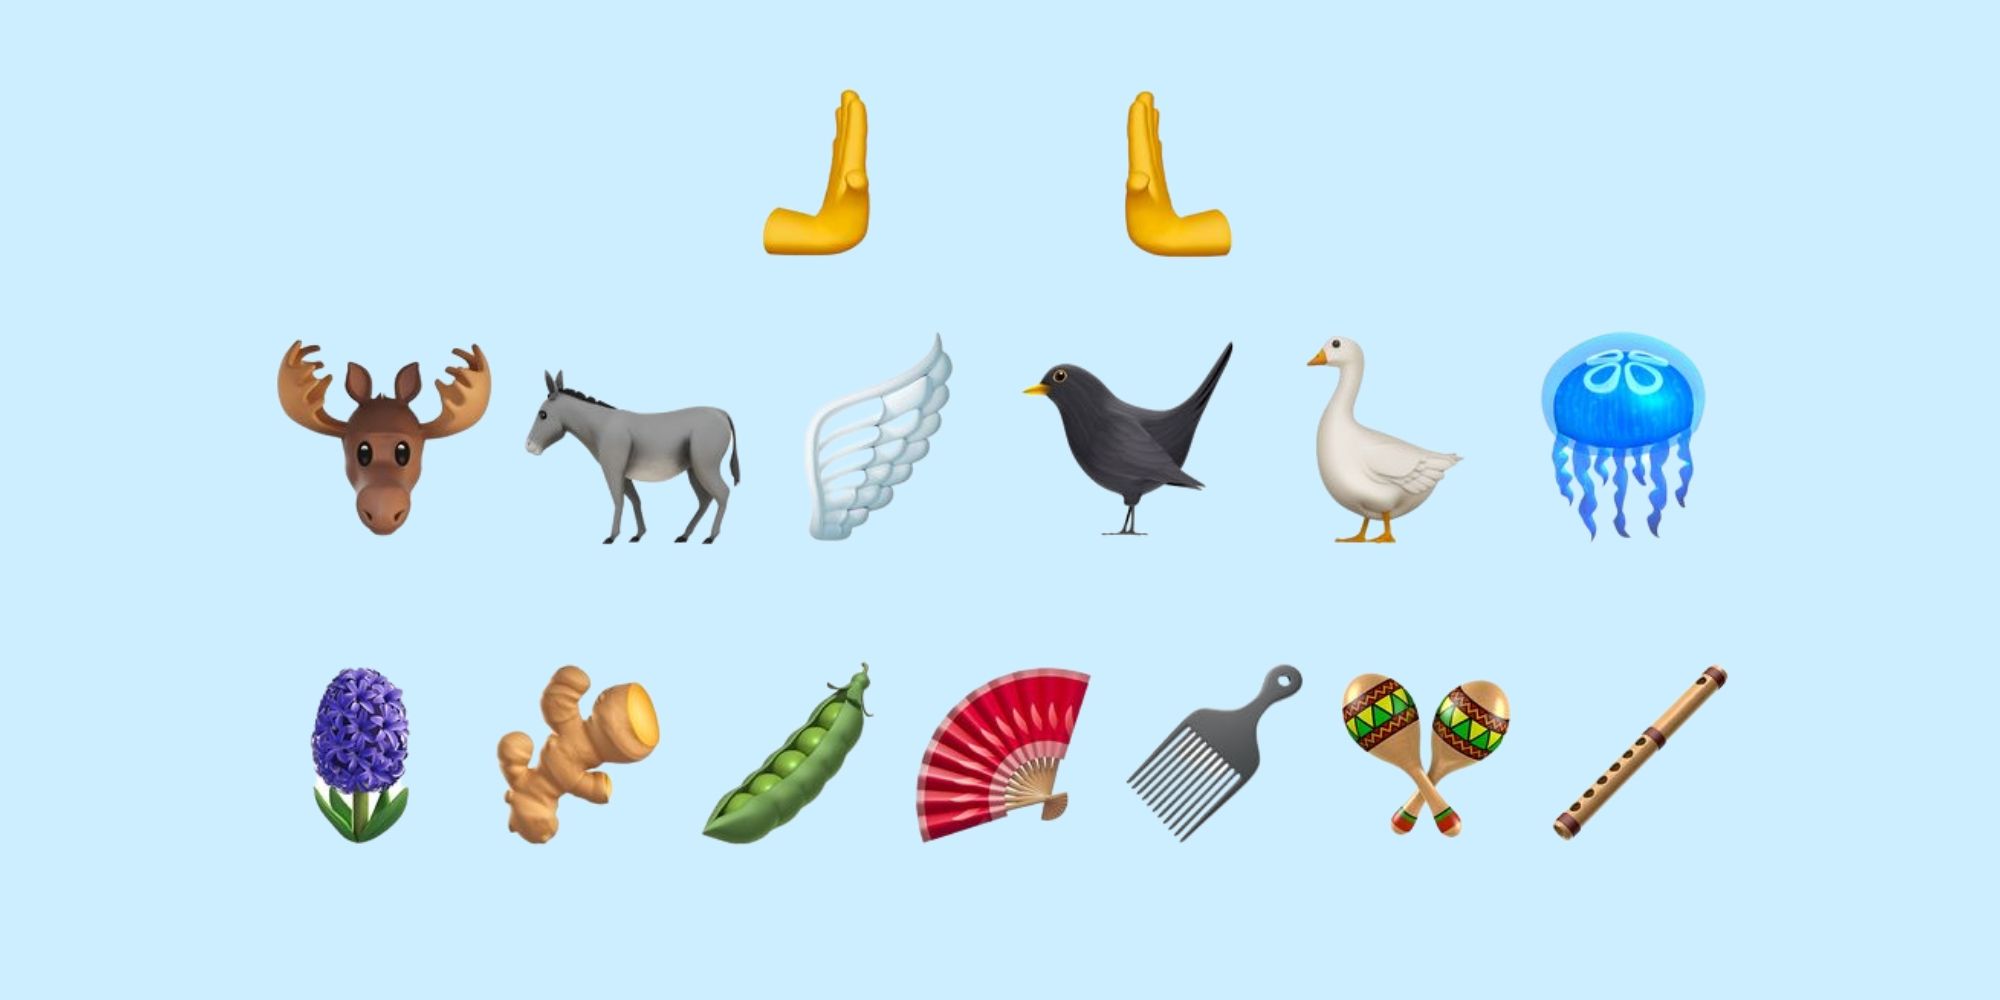 new emojis coming with iOS 16.4 public release in march